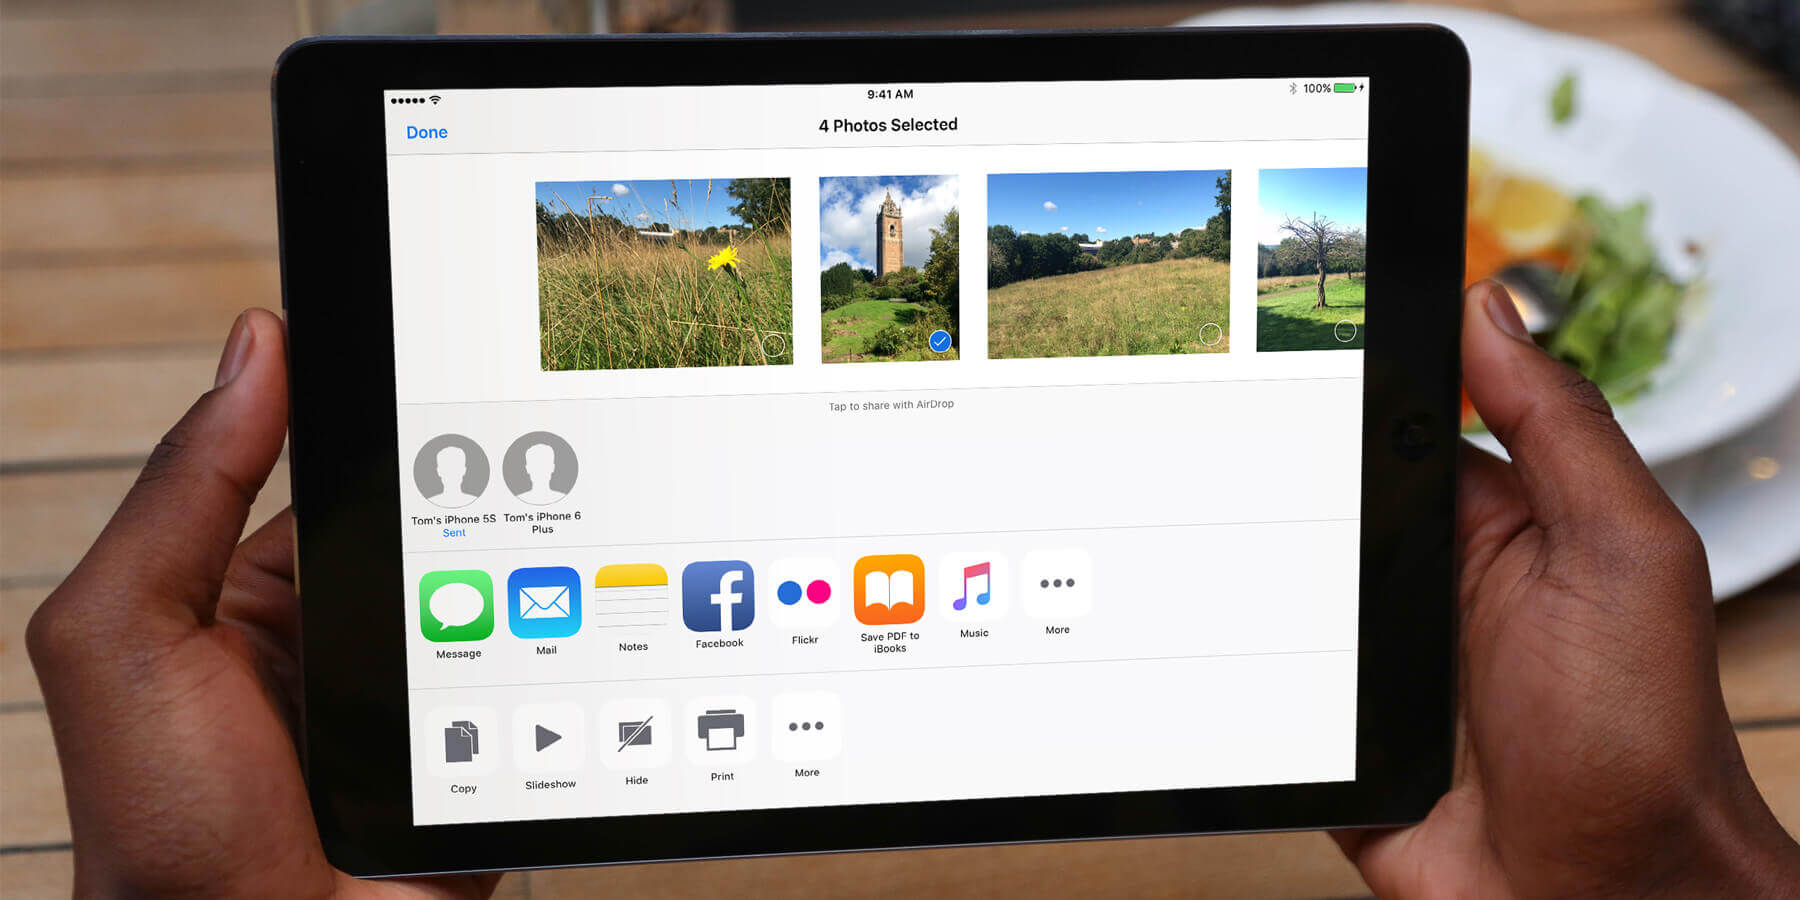 AirDrop: share files wirelessly | iOS 11 Guide [iPad] - TapSmart